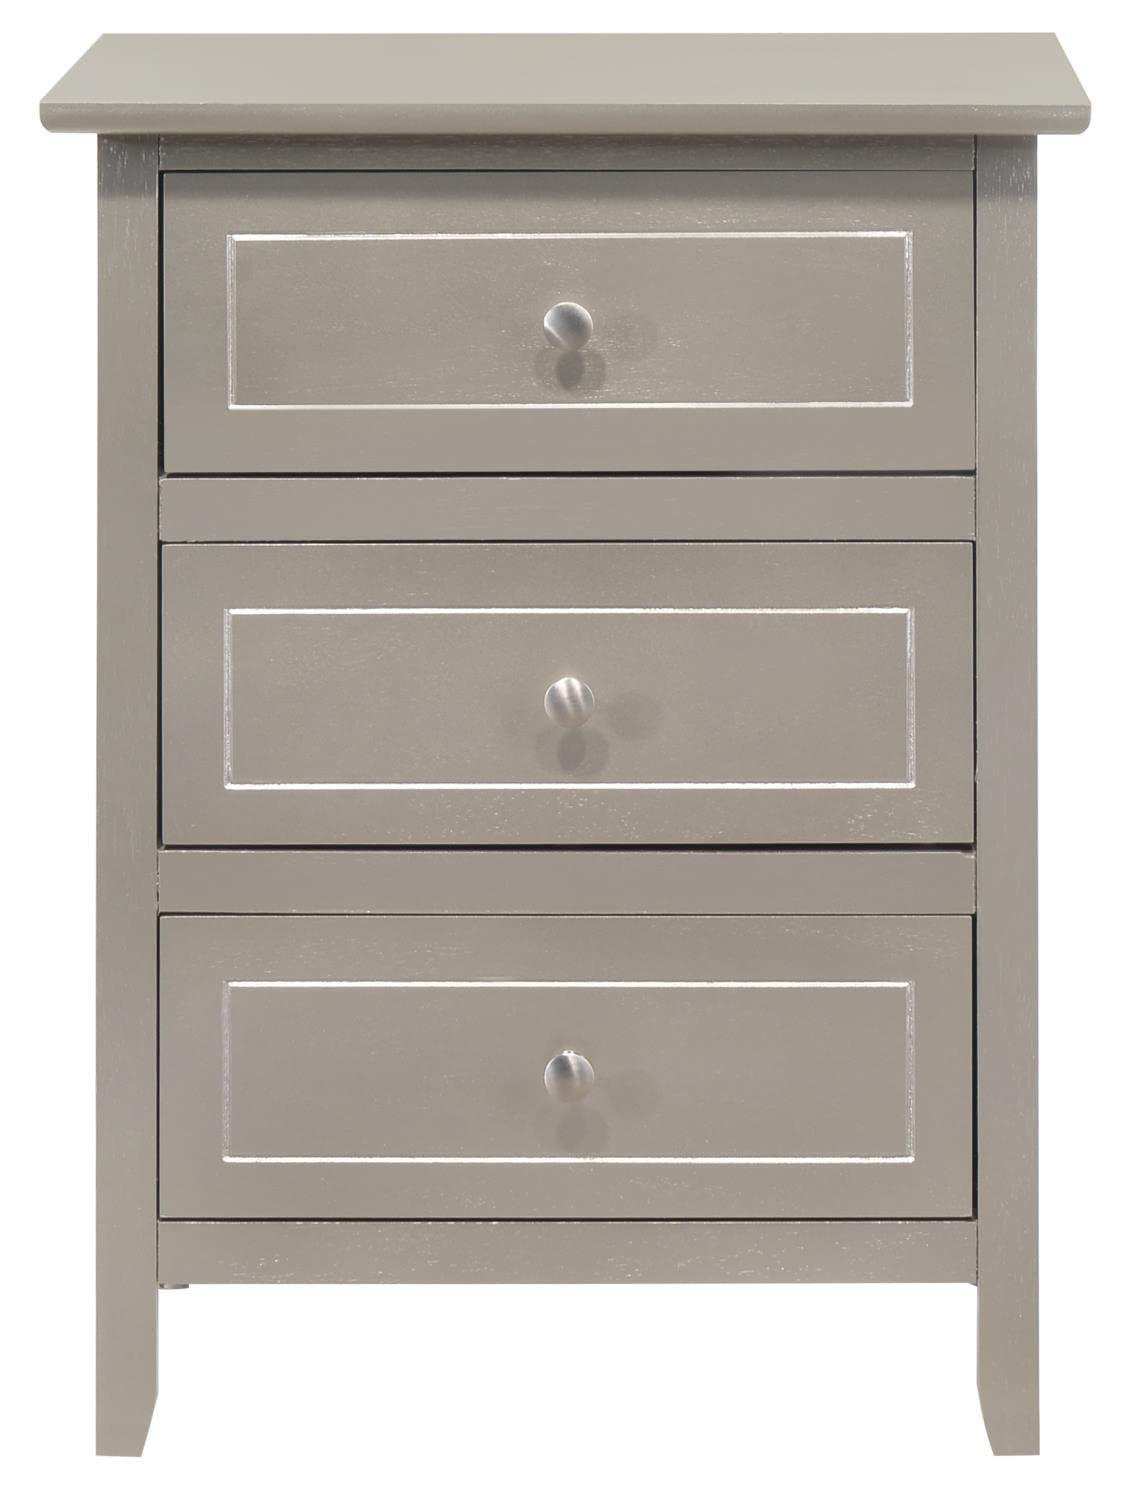 Glory Furniture Daniel 3-Drawer Wooden Nightstand Silver 25 x 15 x 19 Painted